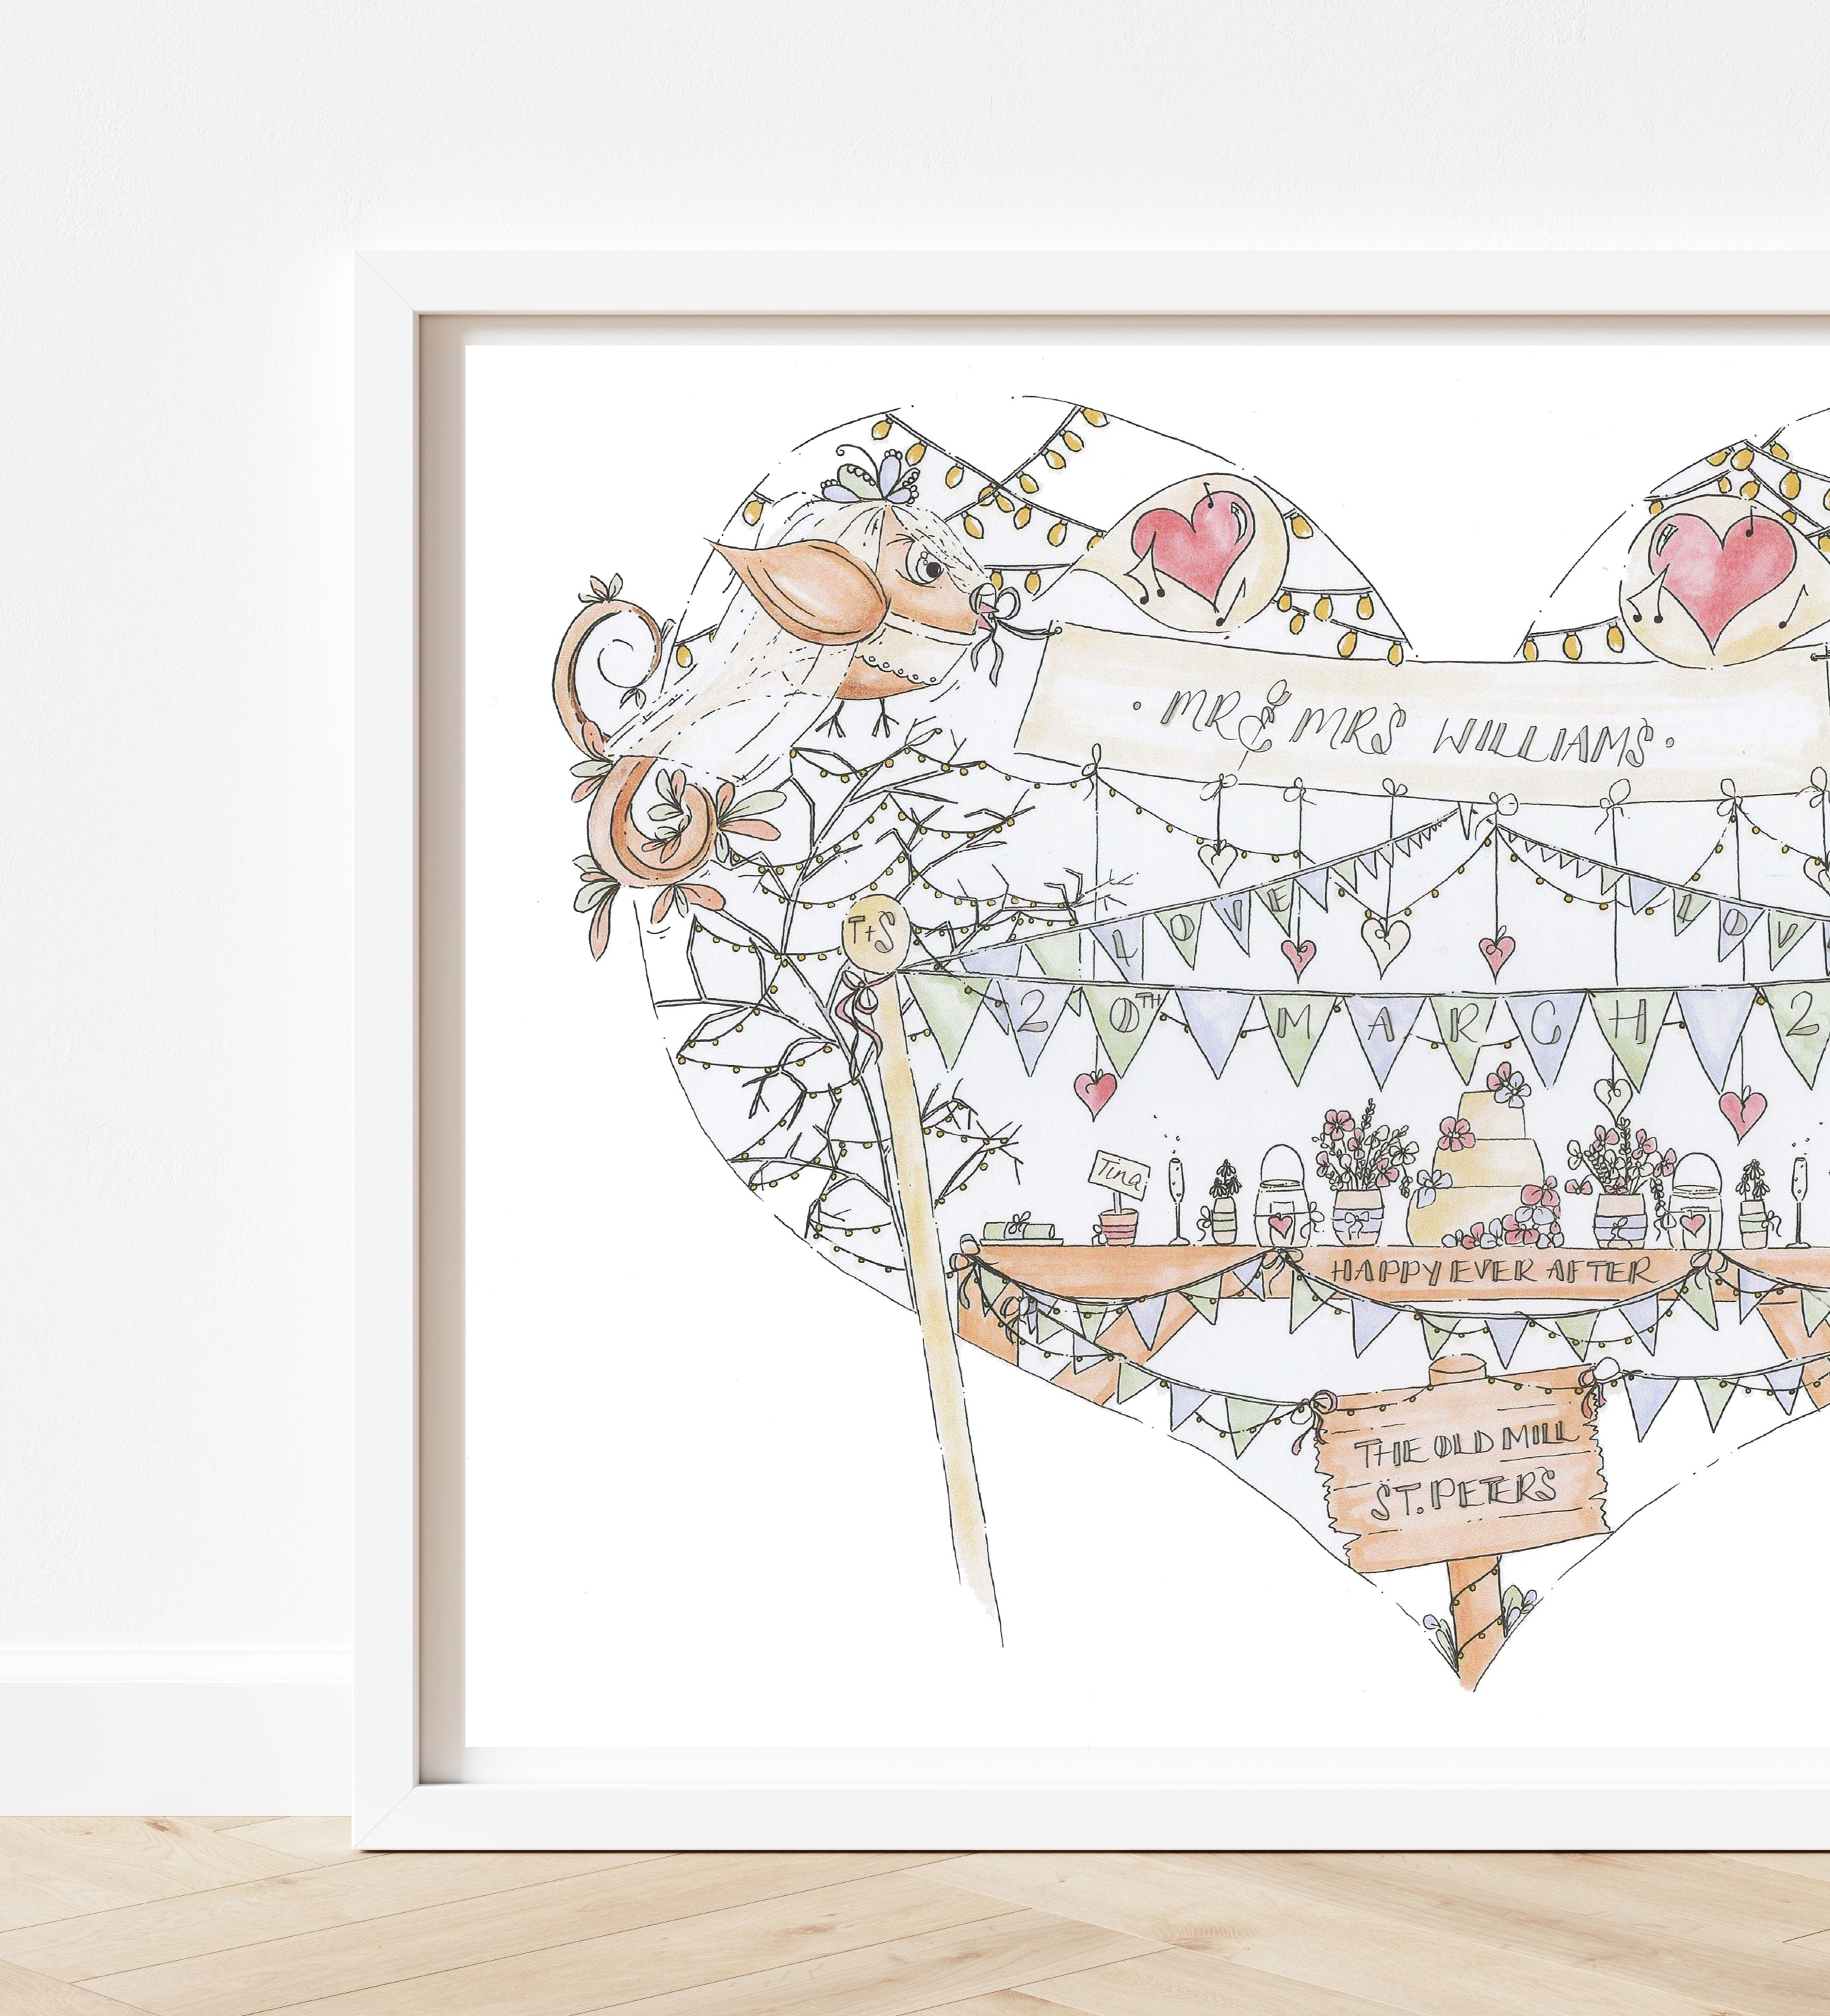 Mr & Mrs Birds and Bunting Personalised Wedding Print